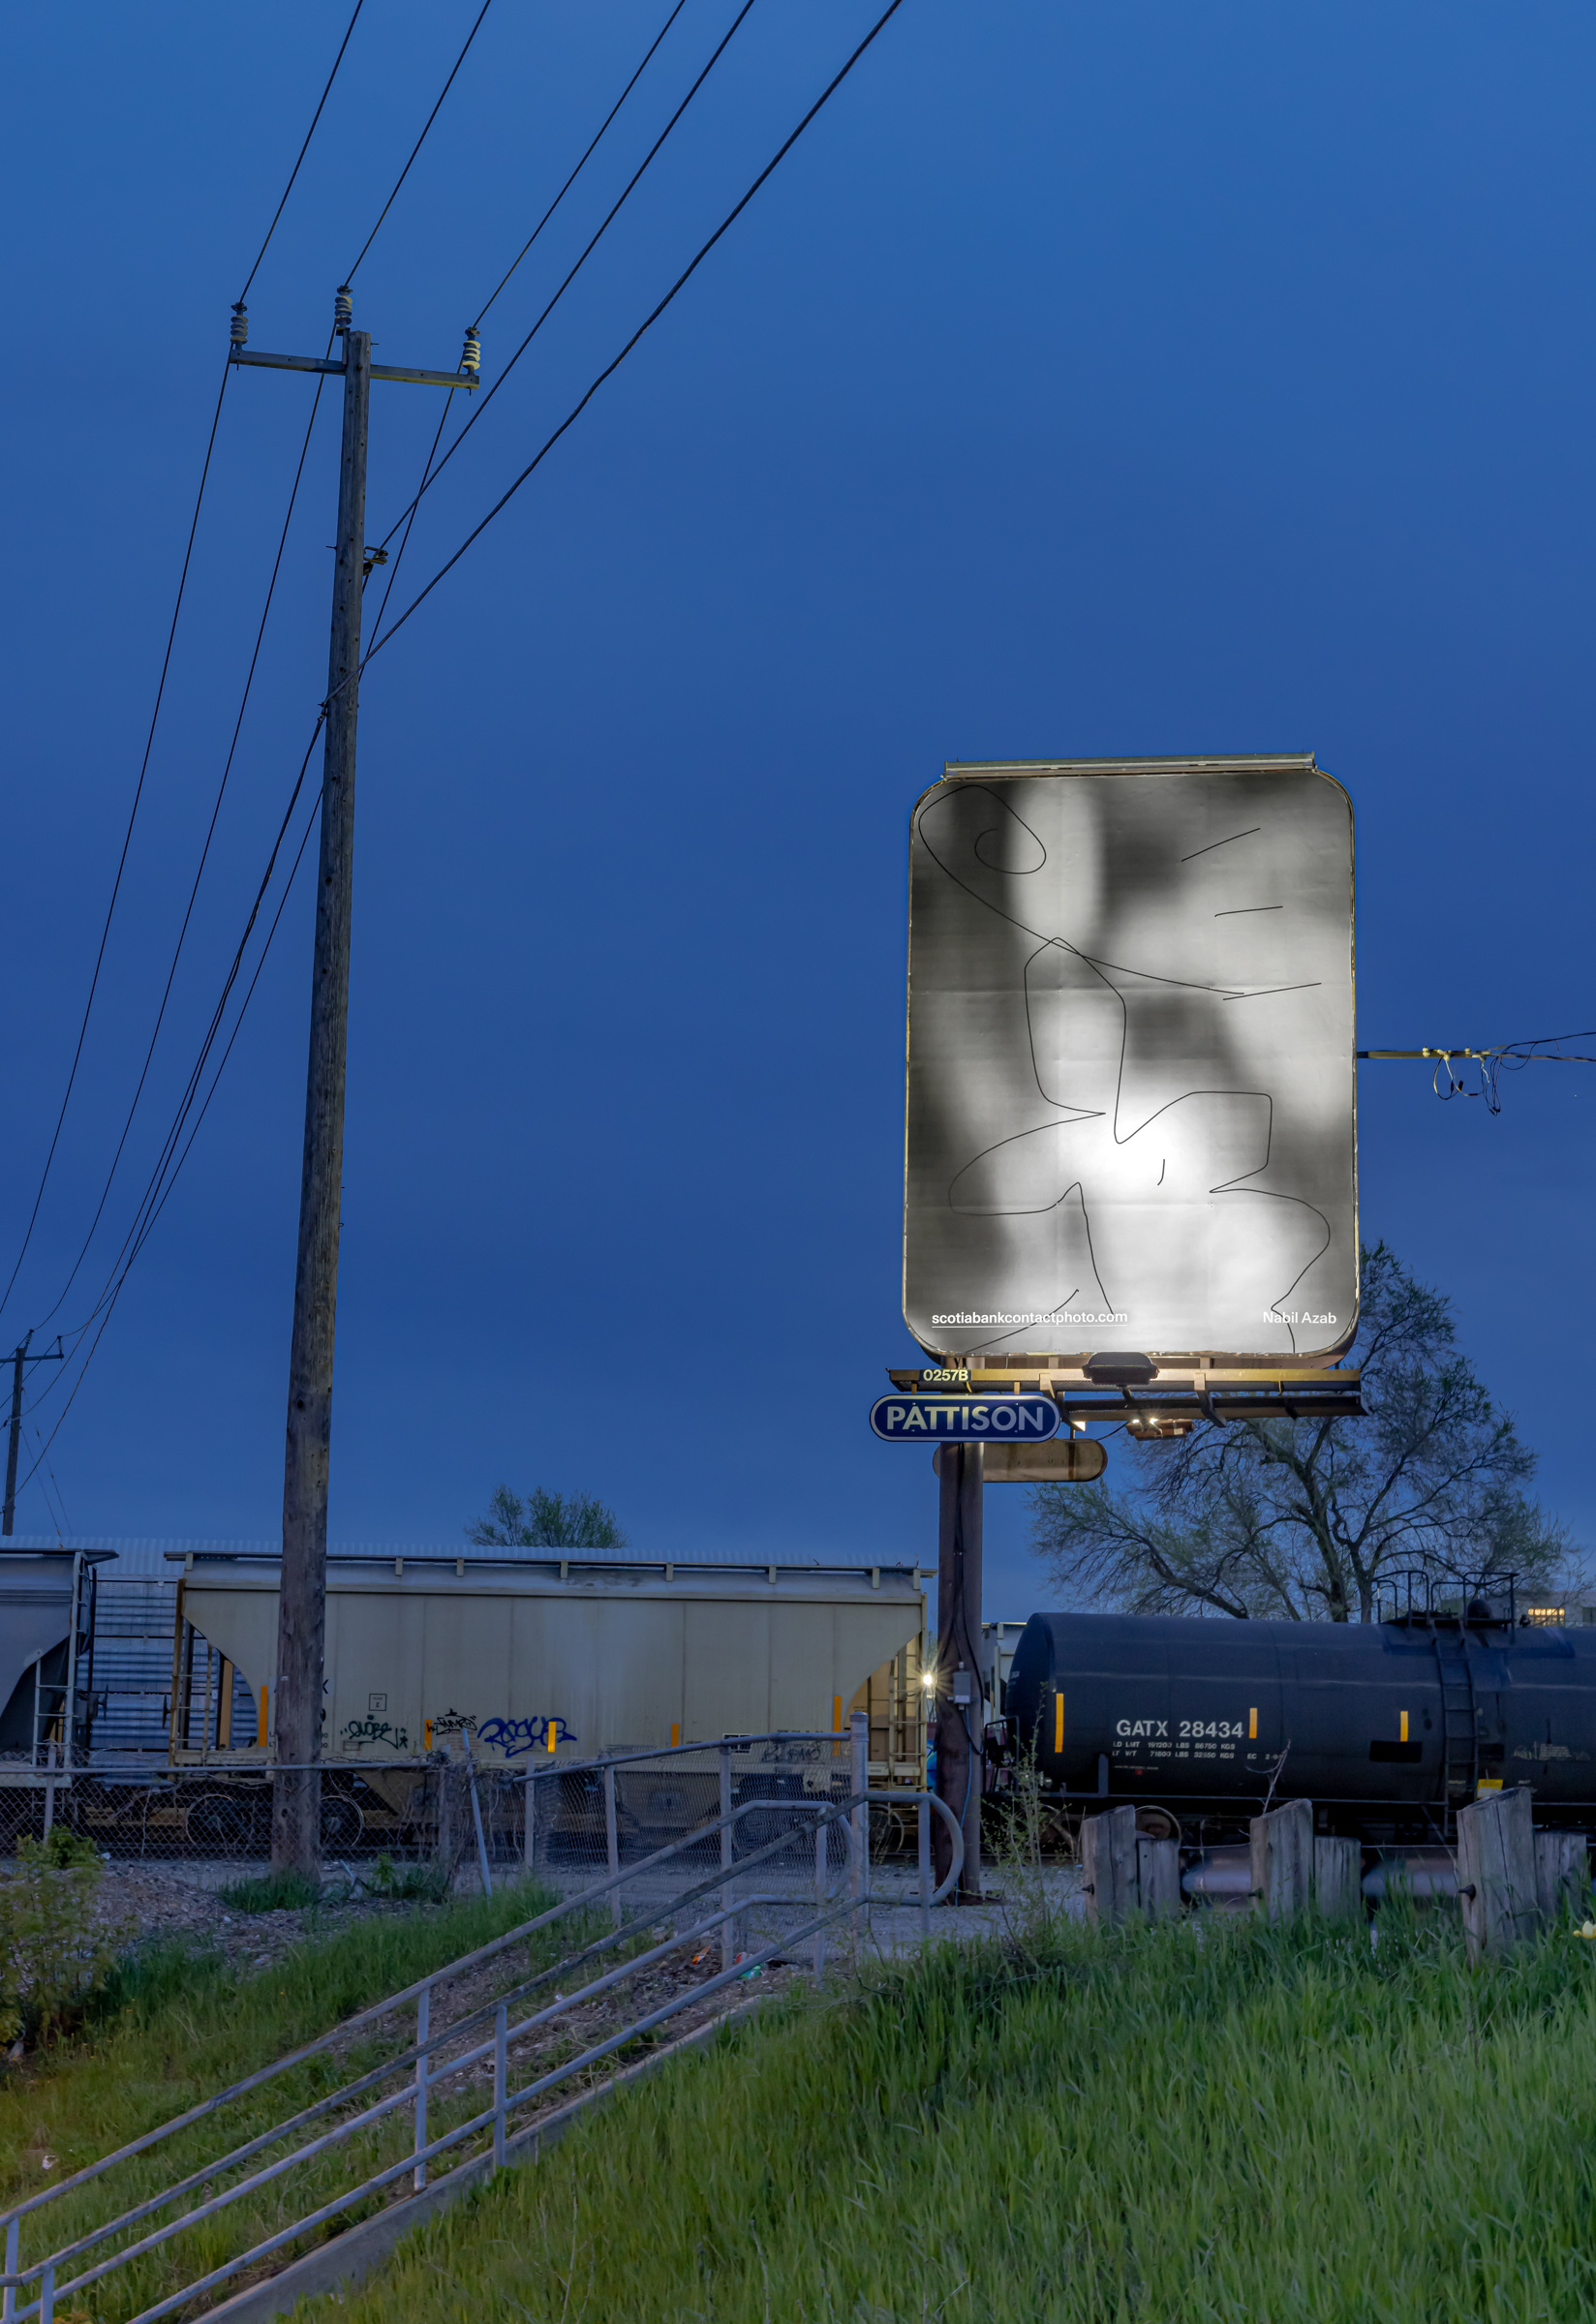     Nabil Azab, Just How We Found It, 2023, installation view, billboards at Runnymede Rd and Ryding St, Toronto. Courtesy of the artist and Scotiabank CONTACT Photography Festival. Photo: Toni Hafkenscheid

